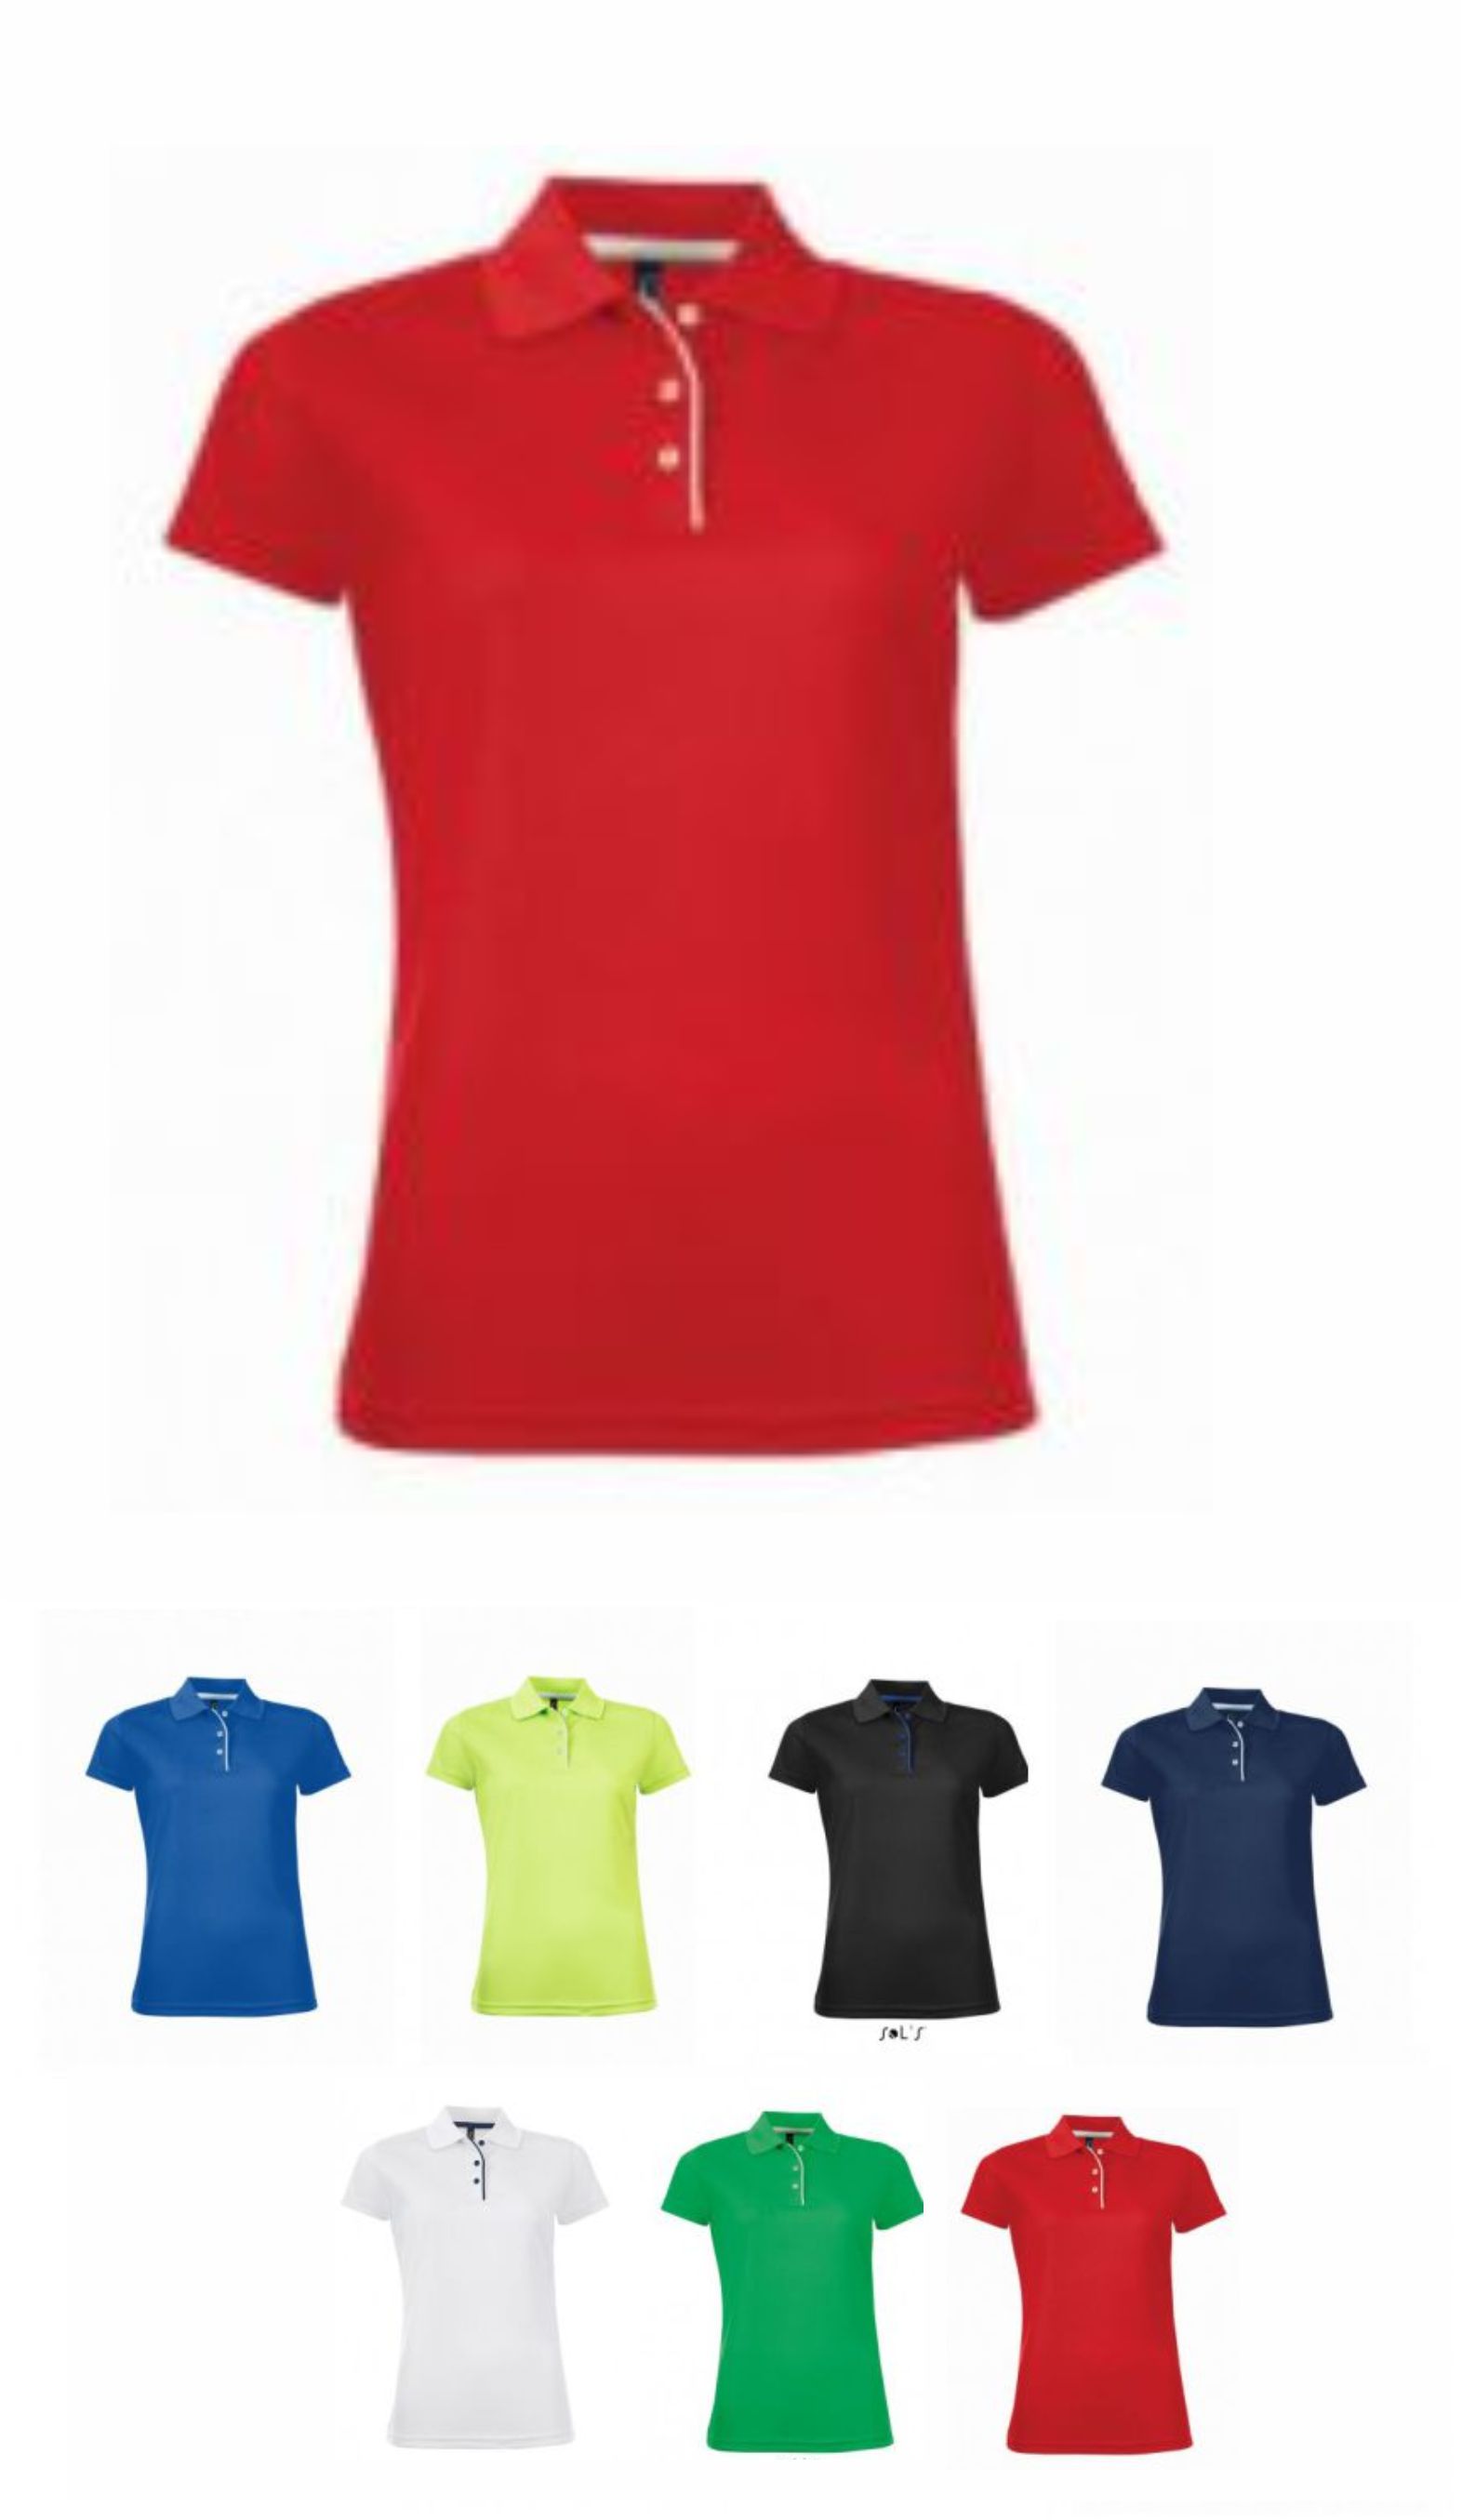 Sol's 01179 Ladies Performance Pique Polo Shirt - Click Image to Close